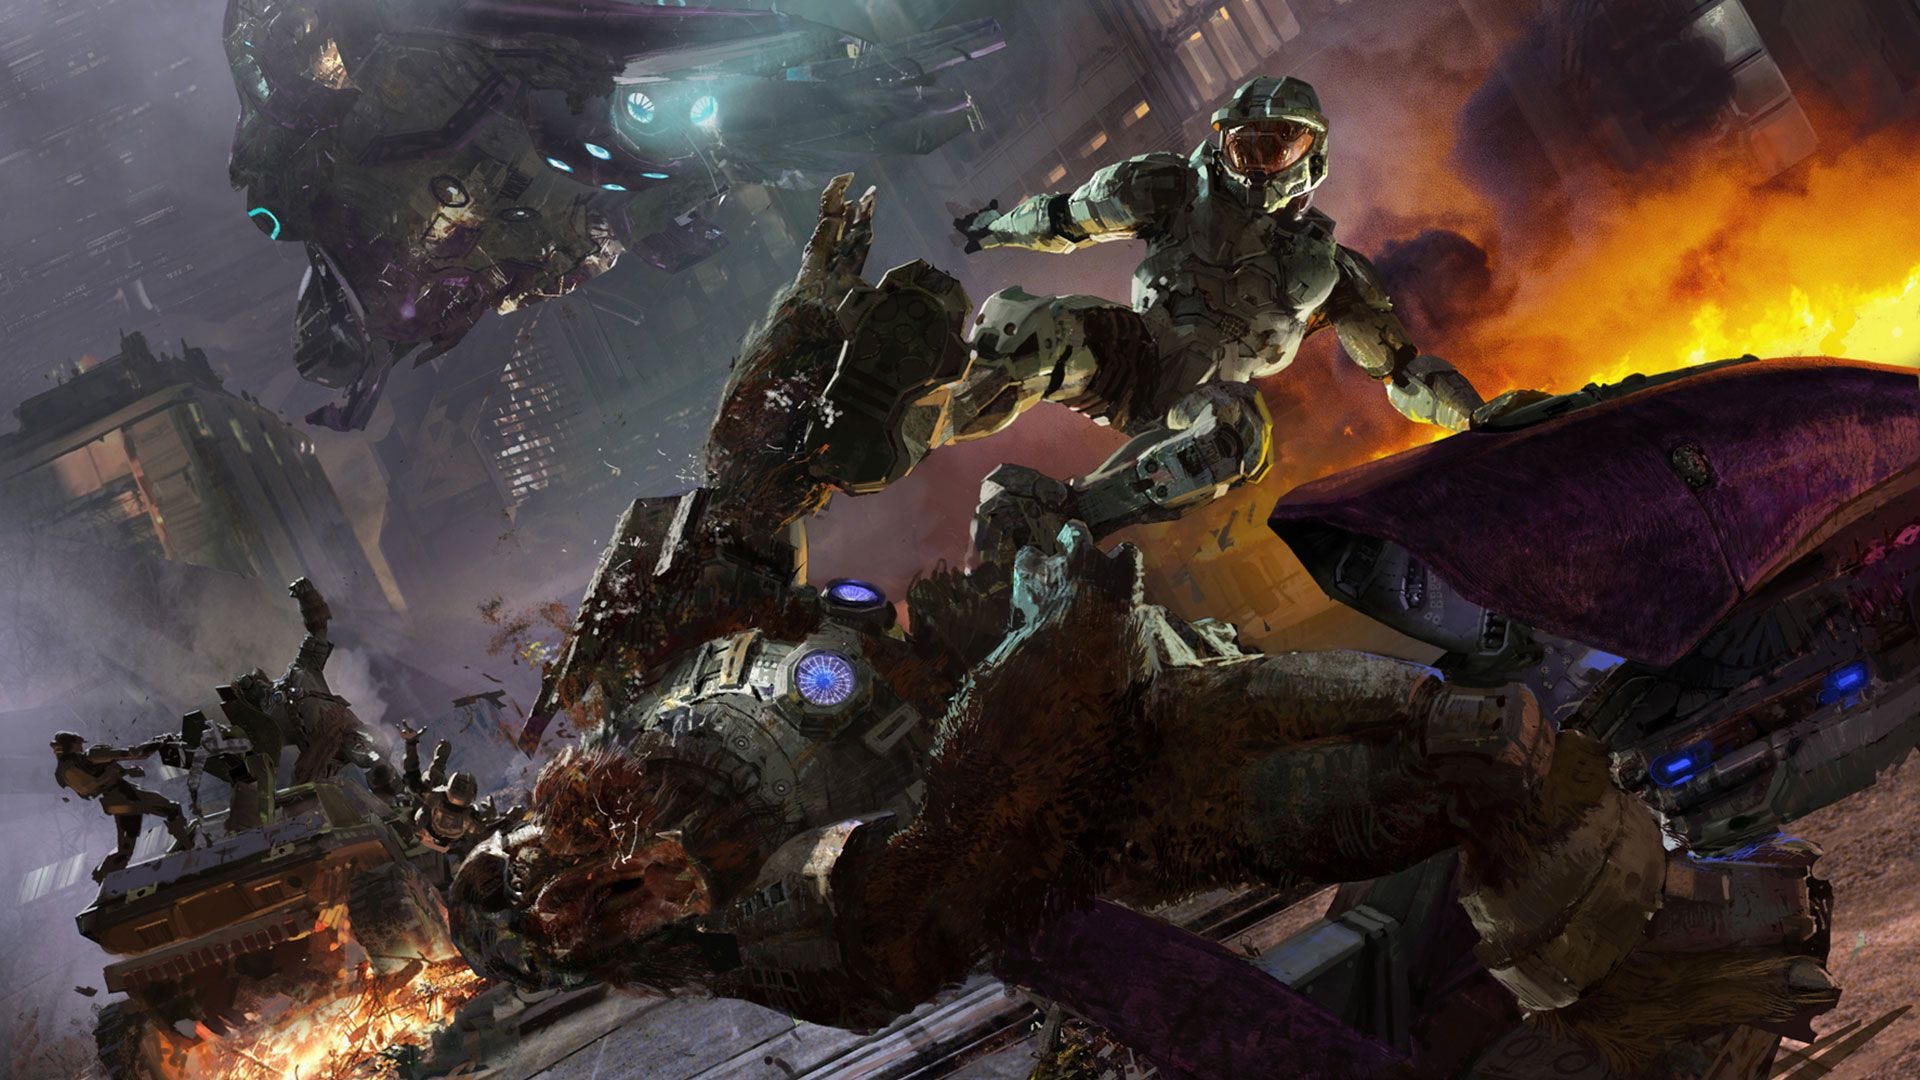 Final 'Halo' Trailer Hits Ahead of March 24 Debut, First Reviews